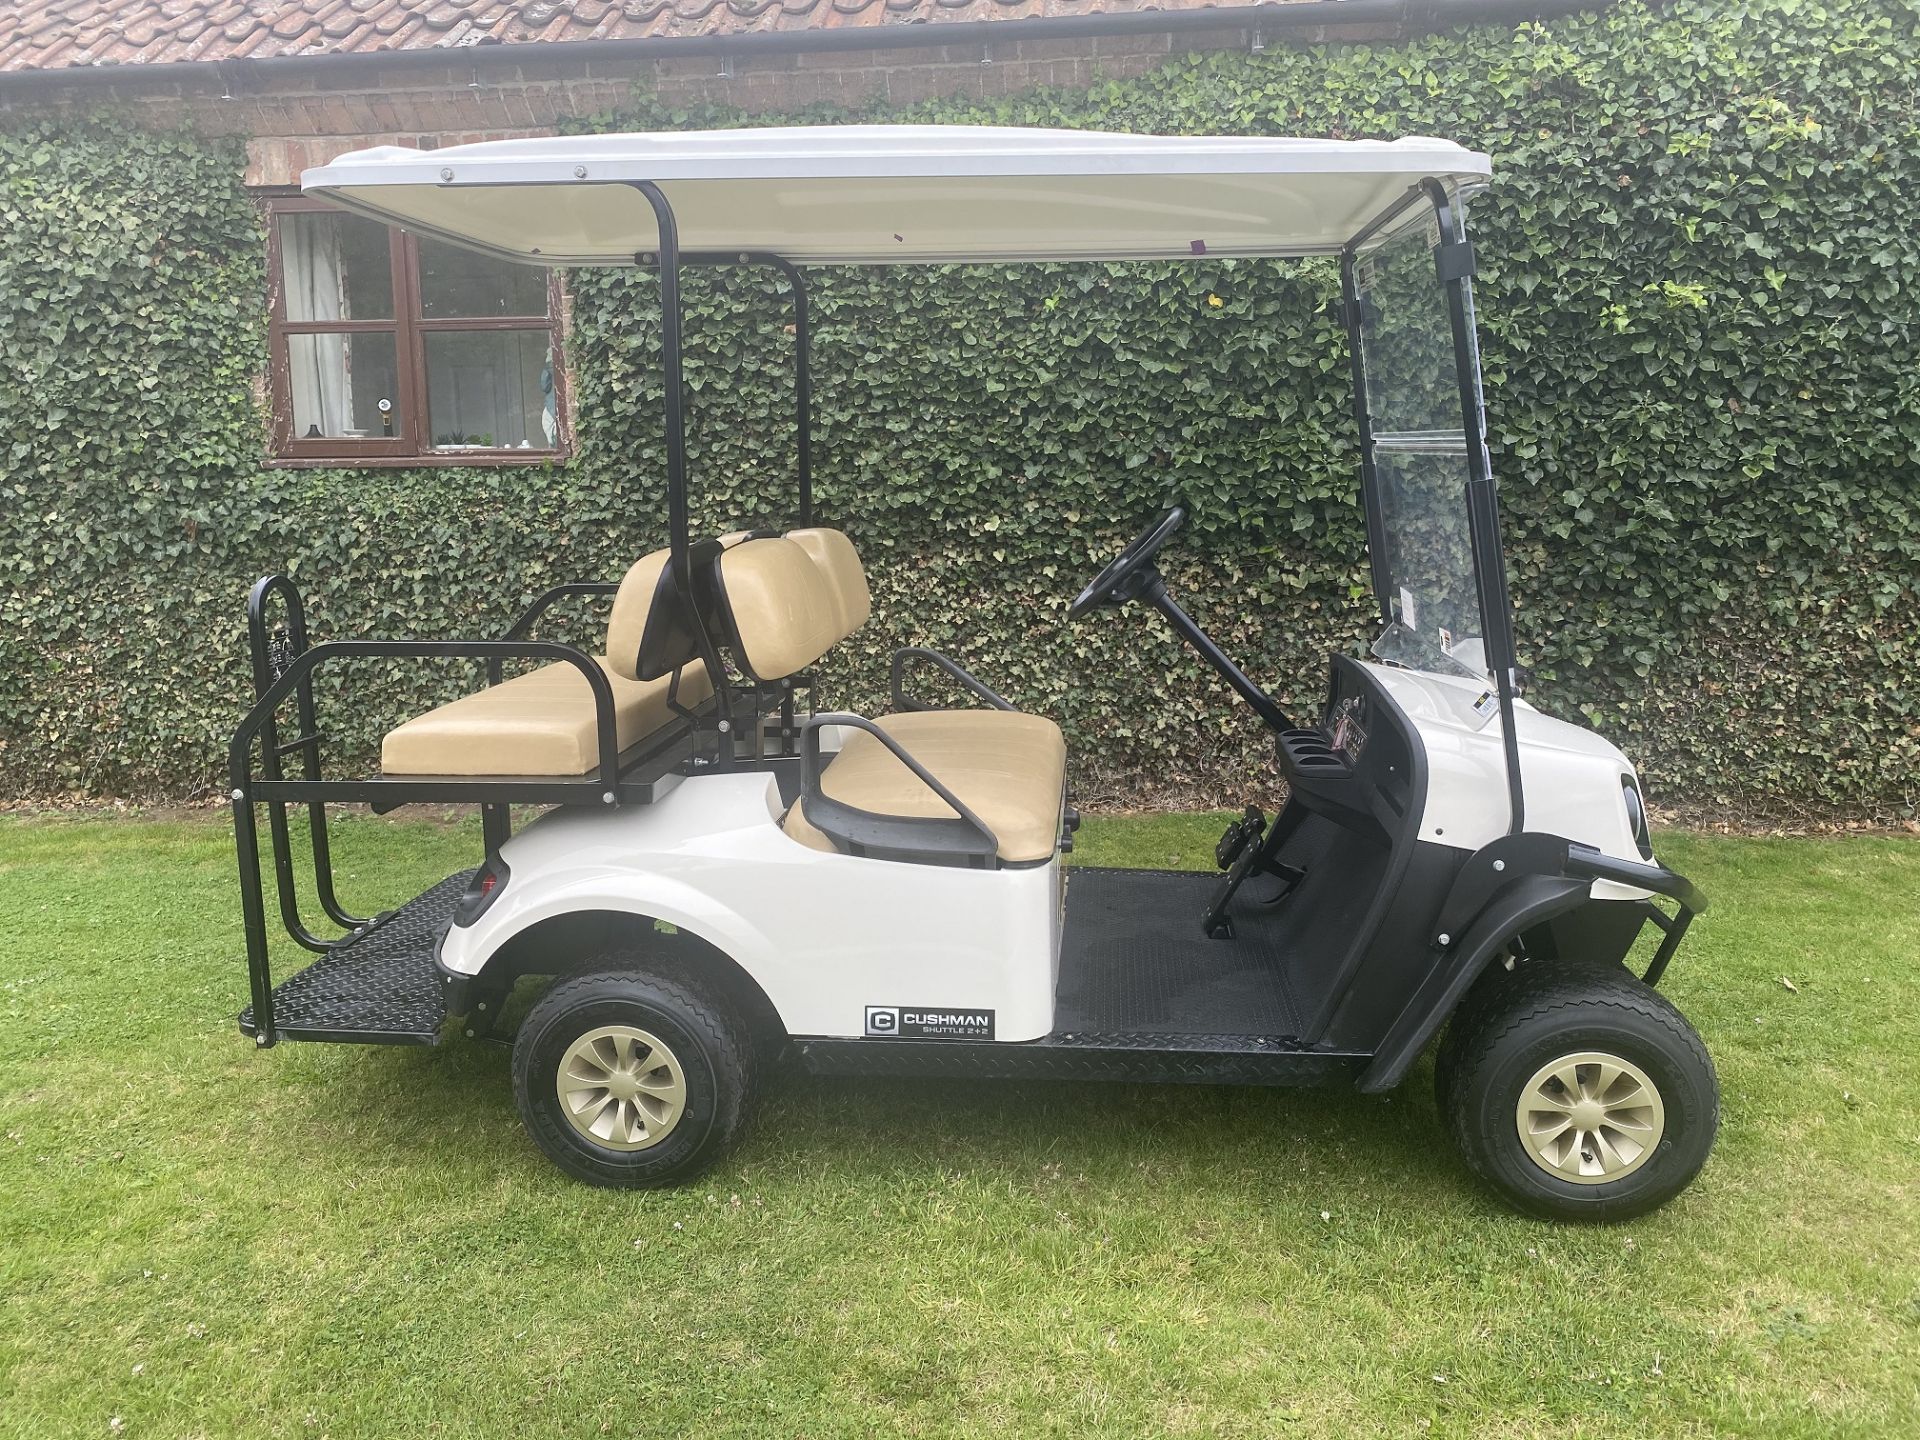 CUSHMAN EZGO 2 + 2 PETROL GOLF BUGGY, NEW JULY 2018, ONLY 106 HOURS FROM NEW, 4 SEATER *PLUS VAT*